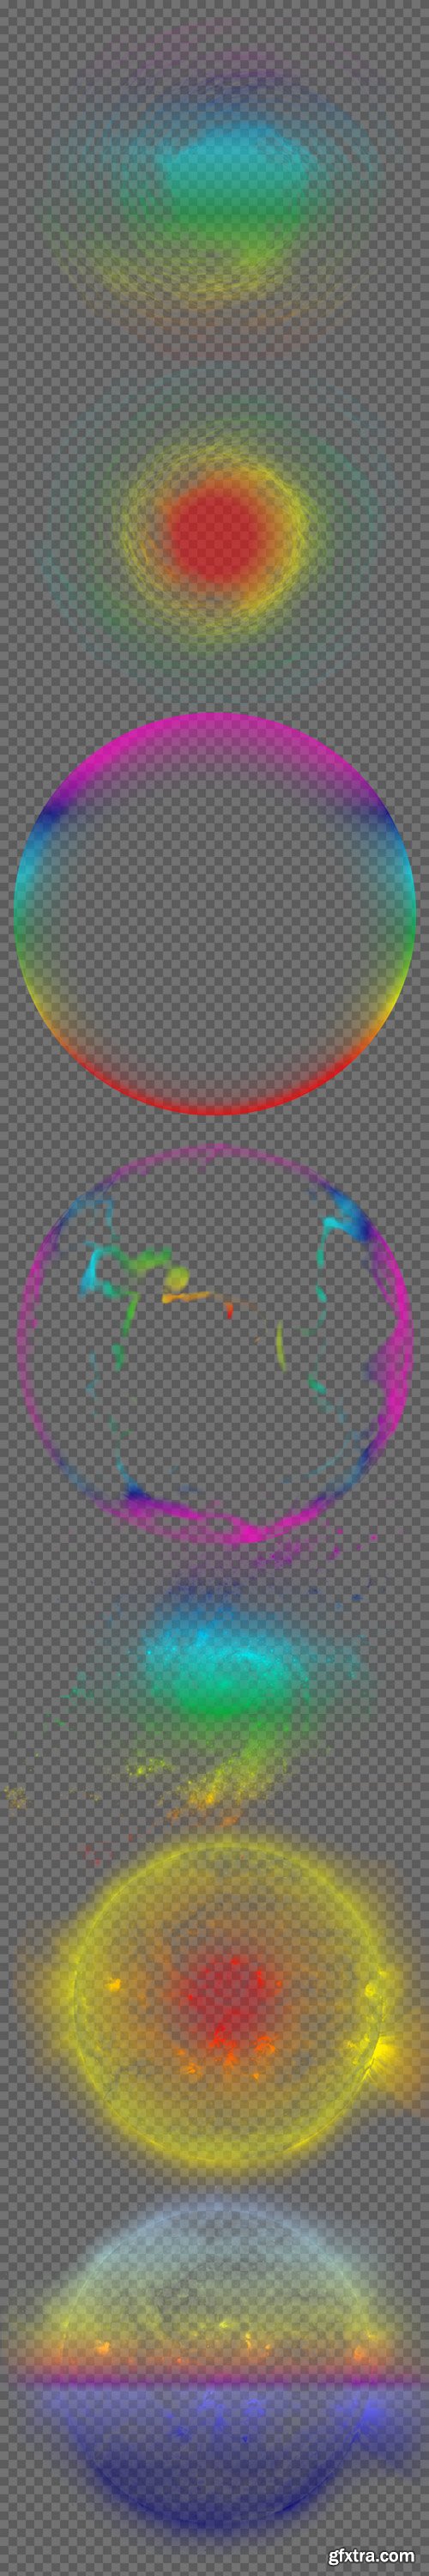 Circles of fairies on a transparent background